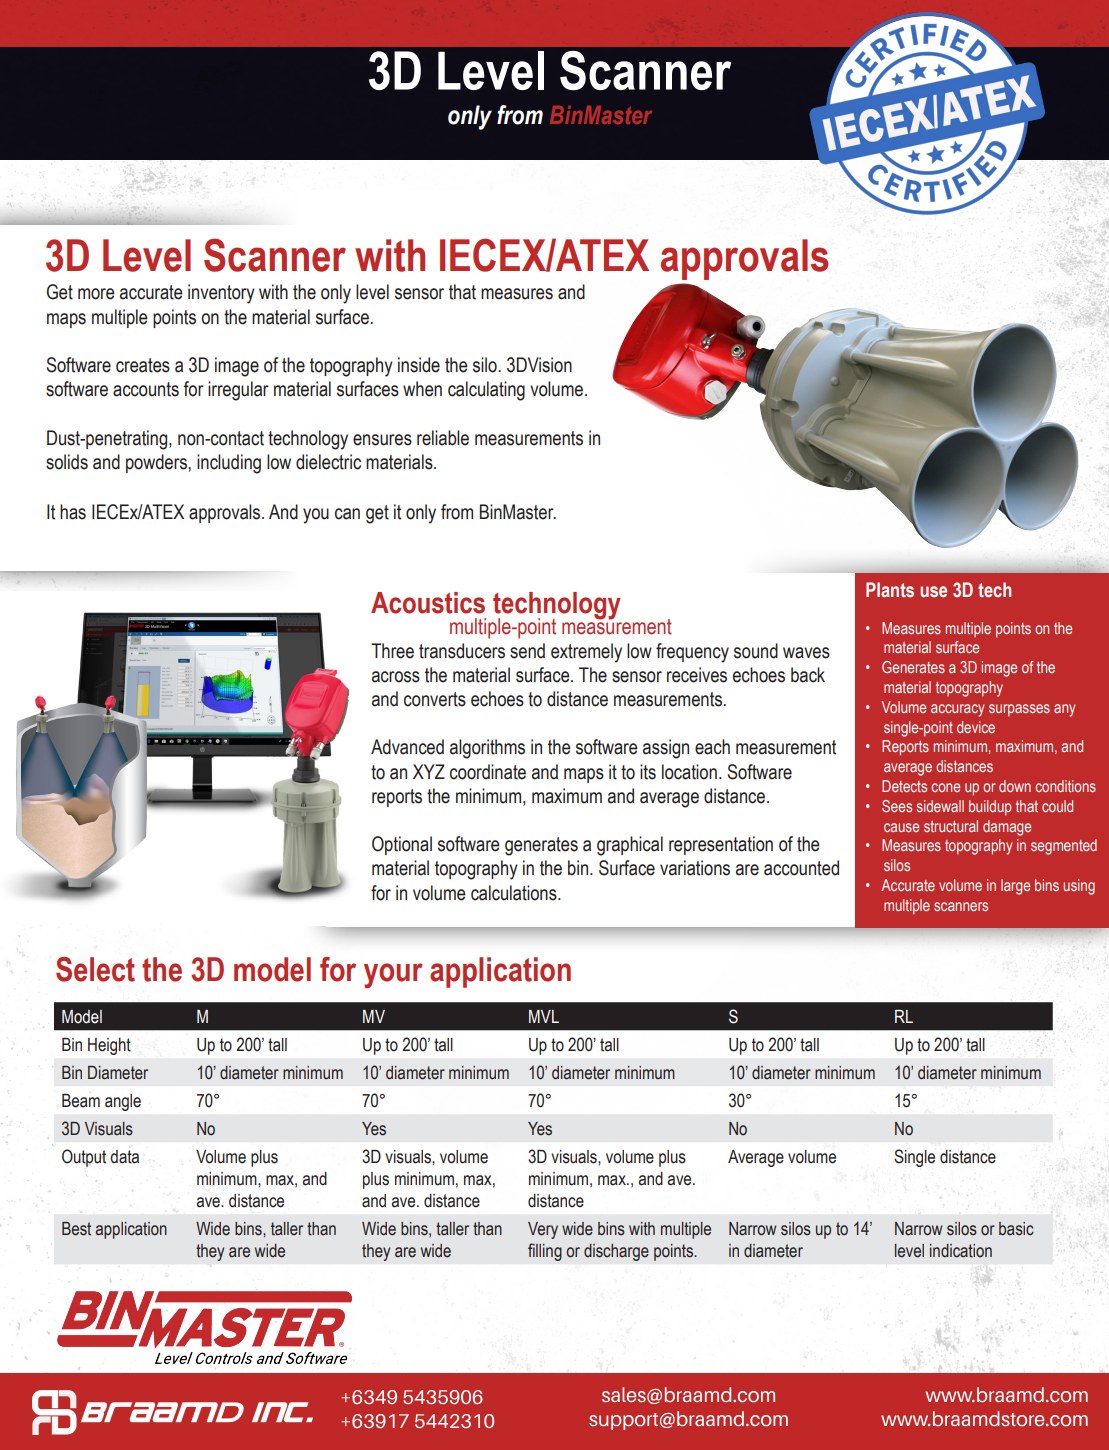 3D Level Scanner with IECEX/ATEX Approvals